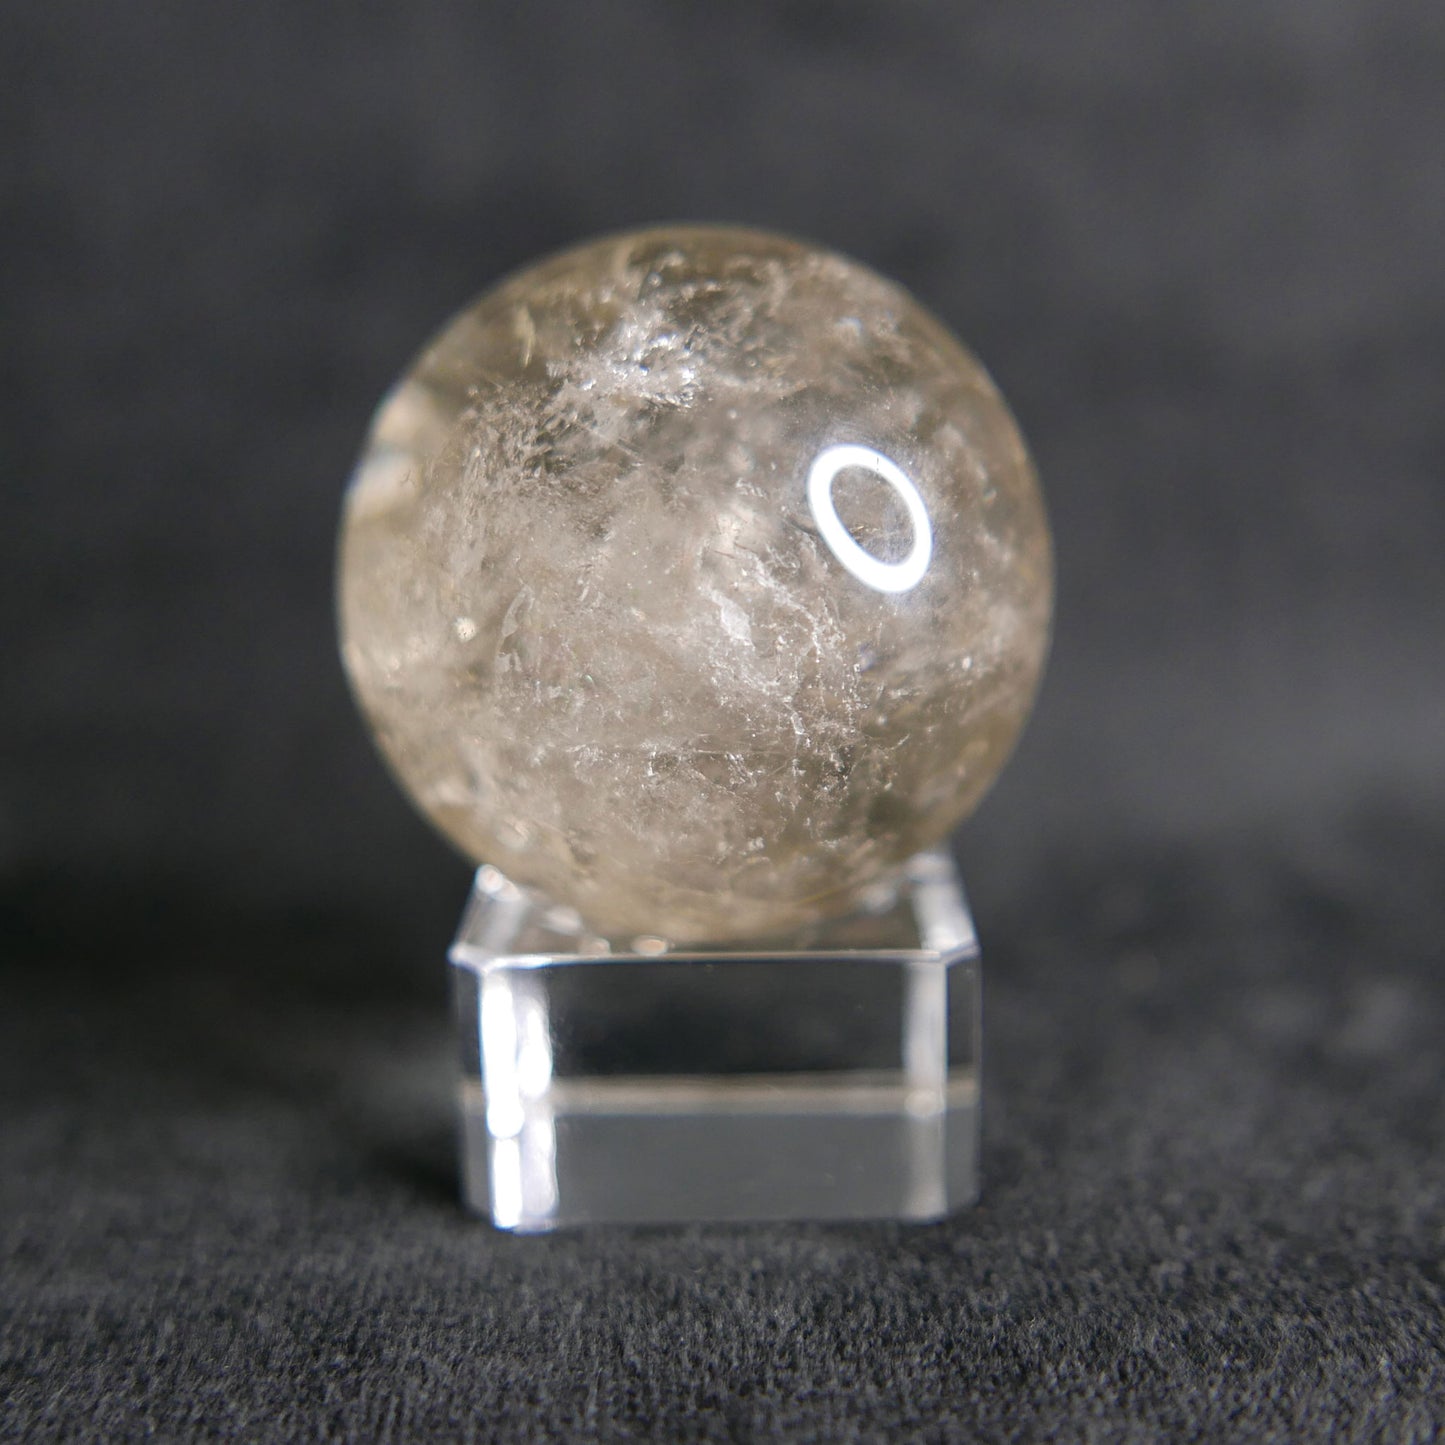 citrine sphere clear with rainbows